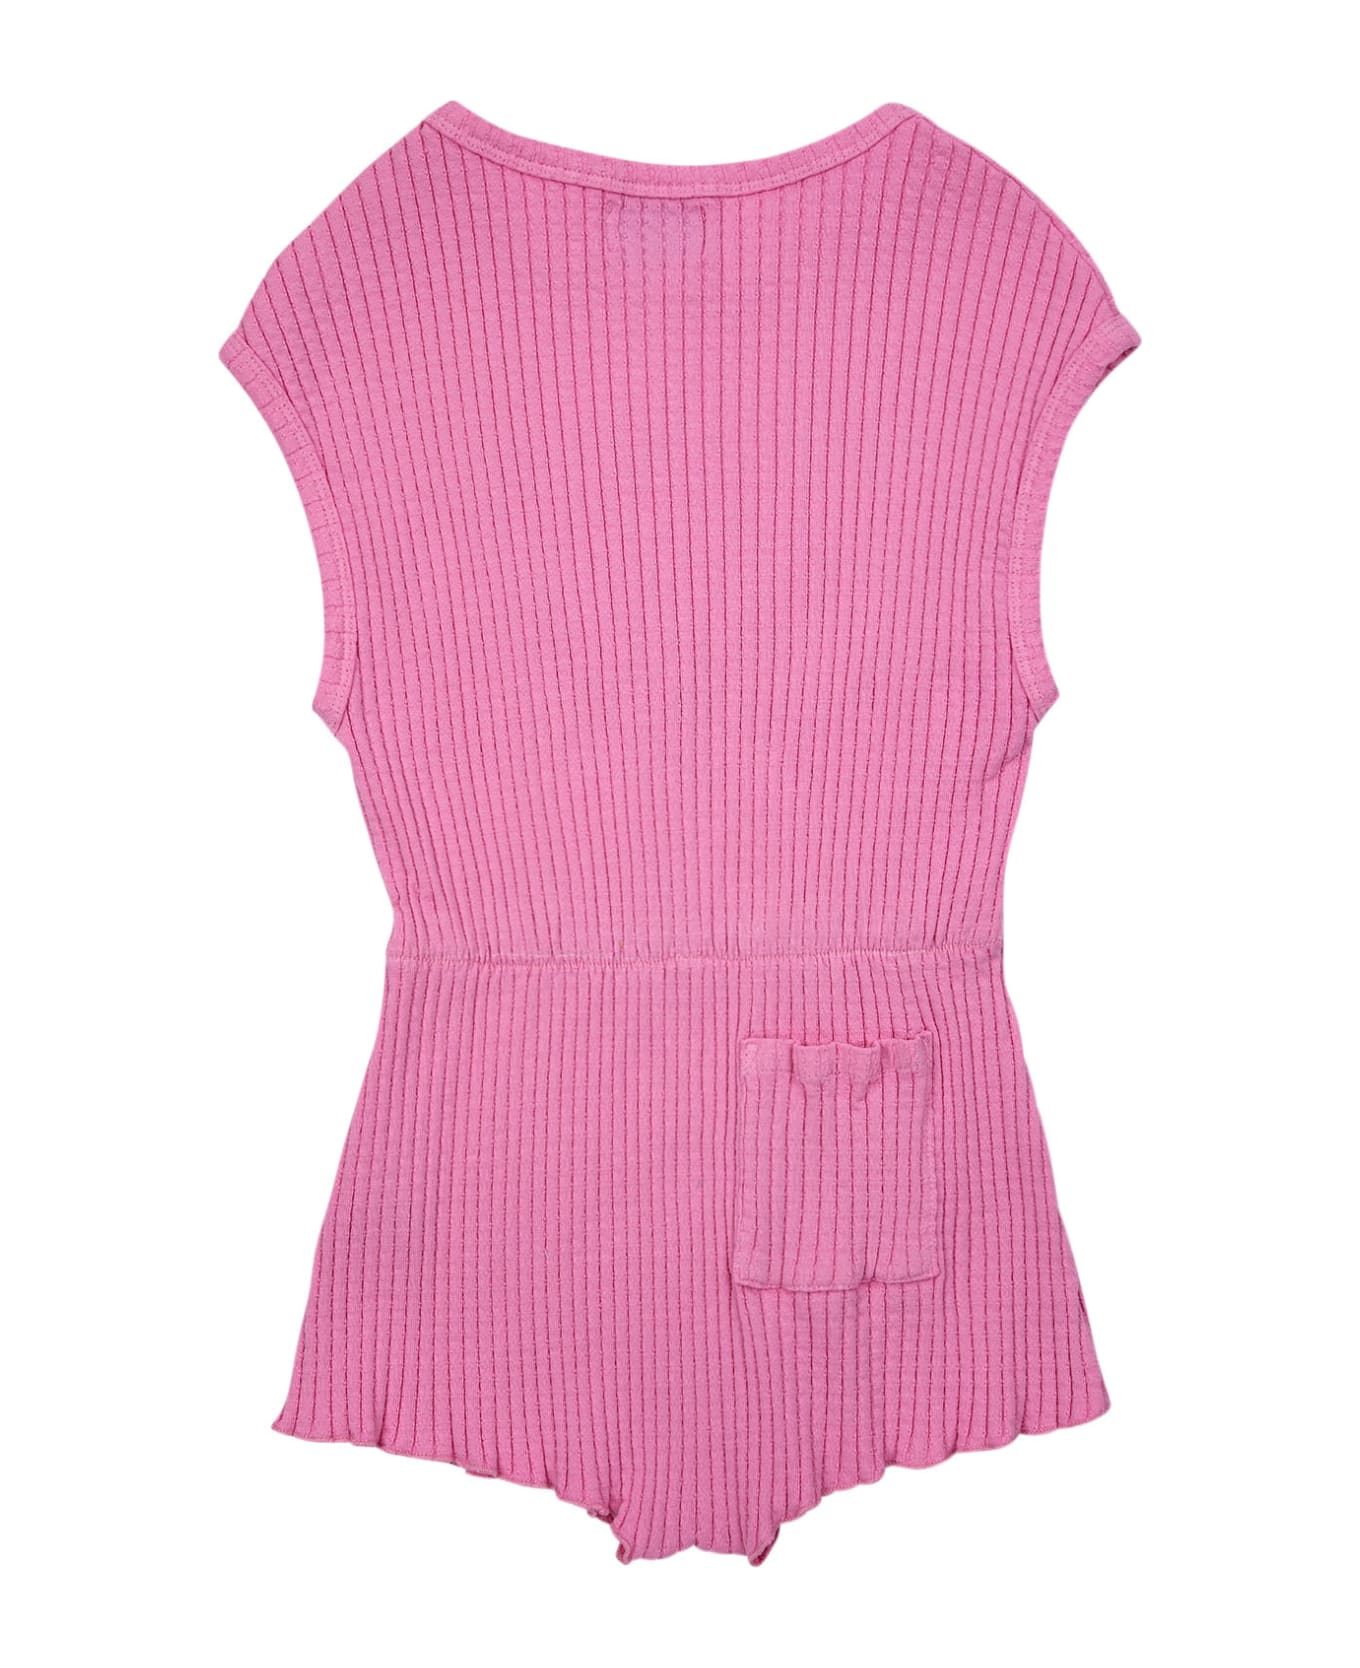 Bobo Choses Pink Jumpsuit For Girl With Logo - Pink